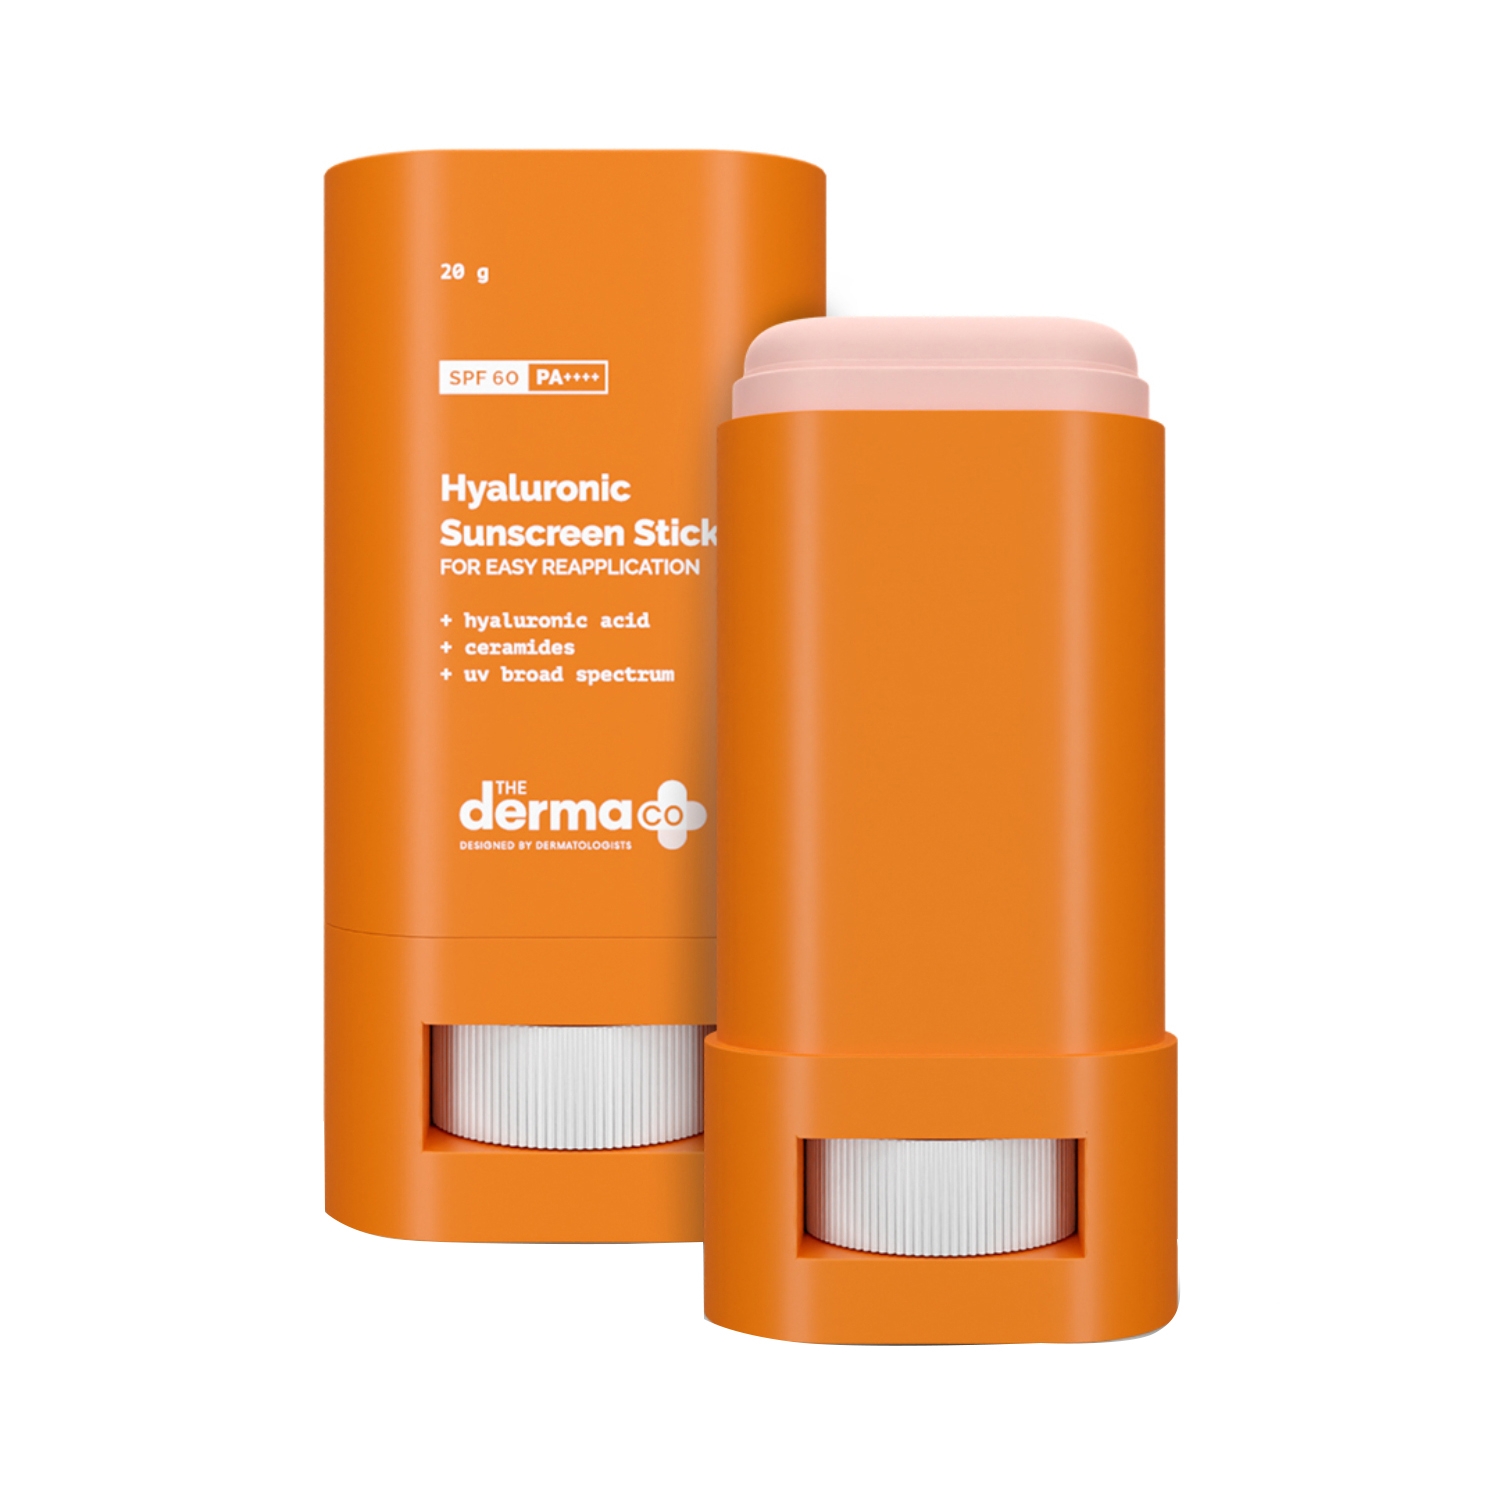 The Derma Co | The Derma Co Hyaluronic Sunscreen Stick For Easy Reapplication With SPF 60 Pa++ (20g)